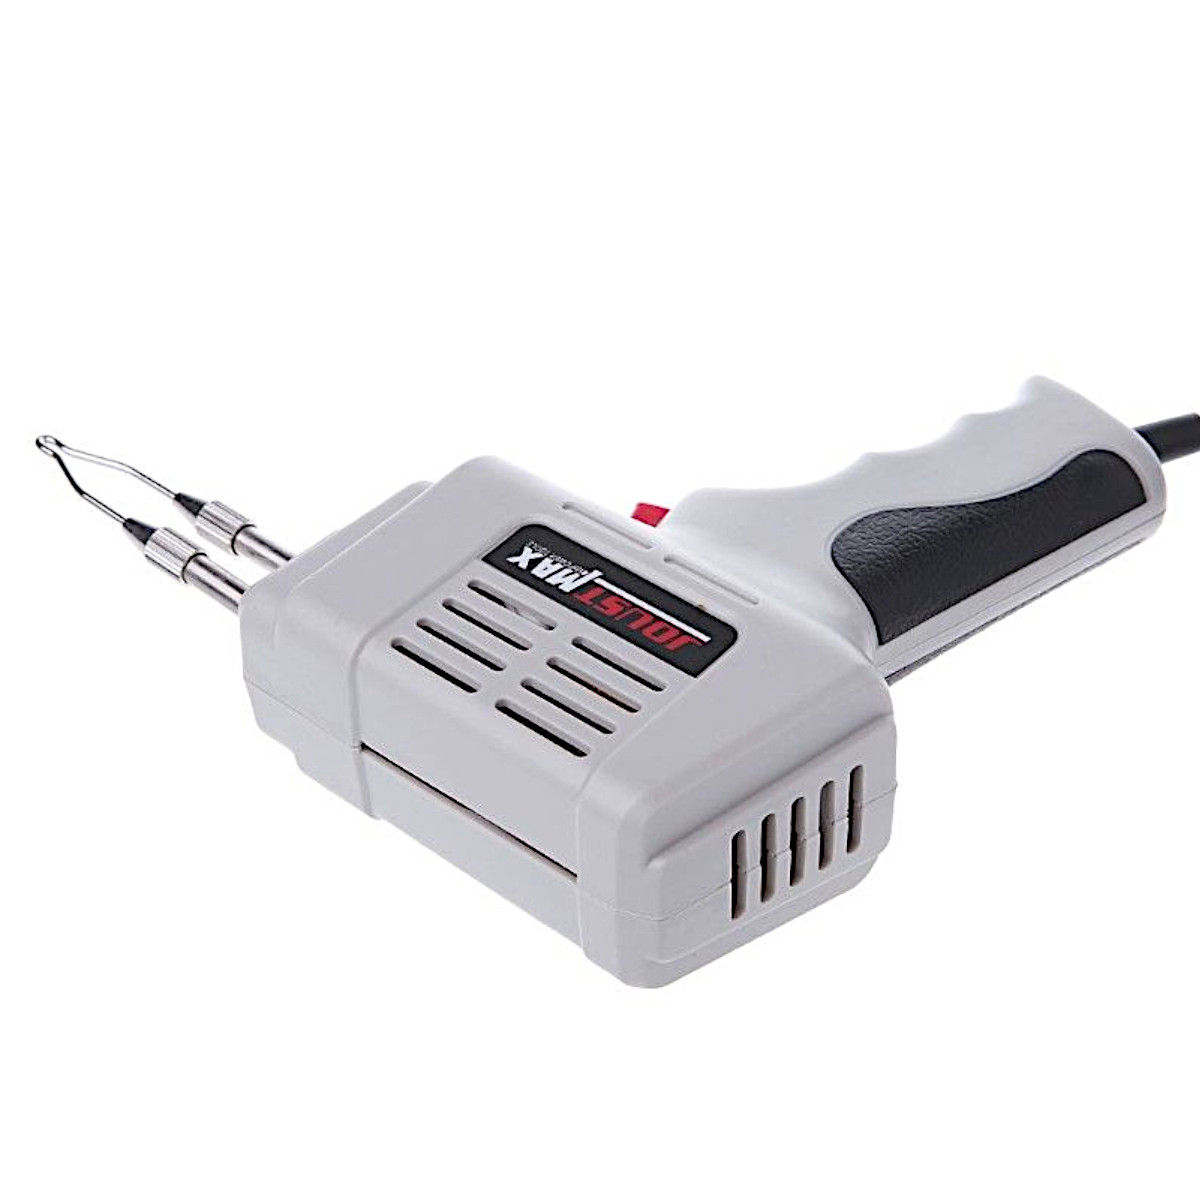 100W-220V-to-240V-Electrical-Soldering-Iron-Fast-Electric-Welding-Solder-Tool-EU-Plug-1393550-8